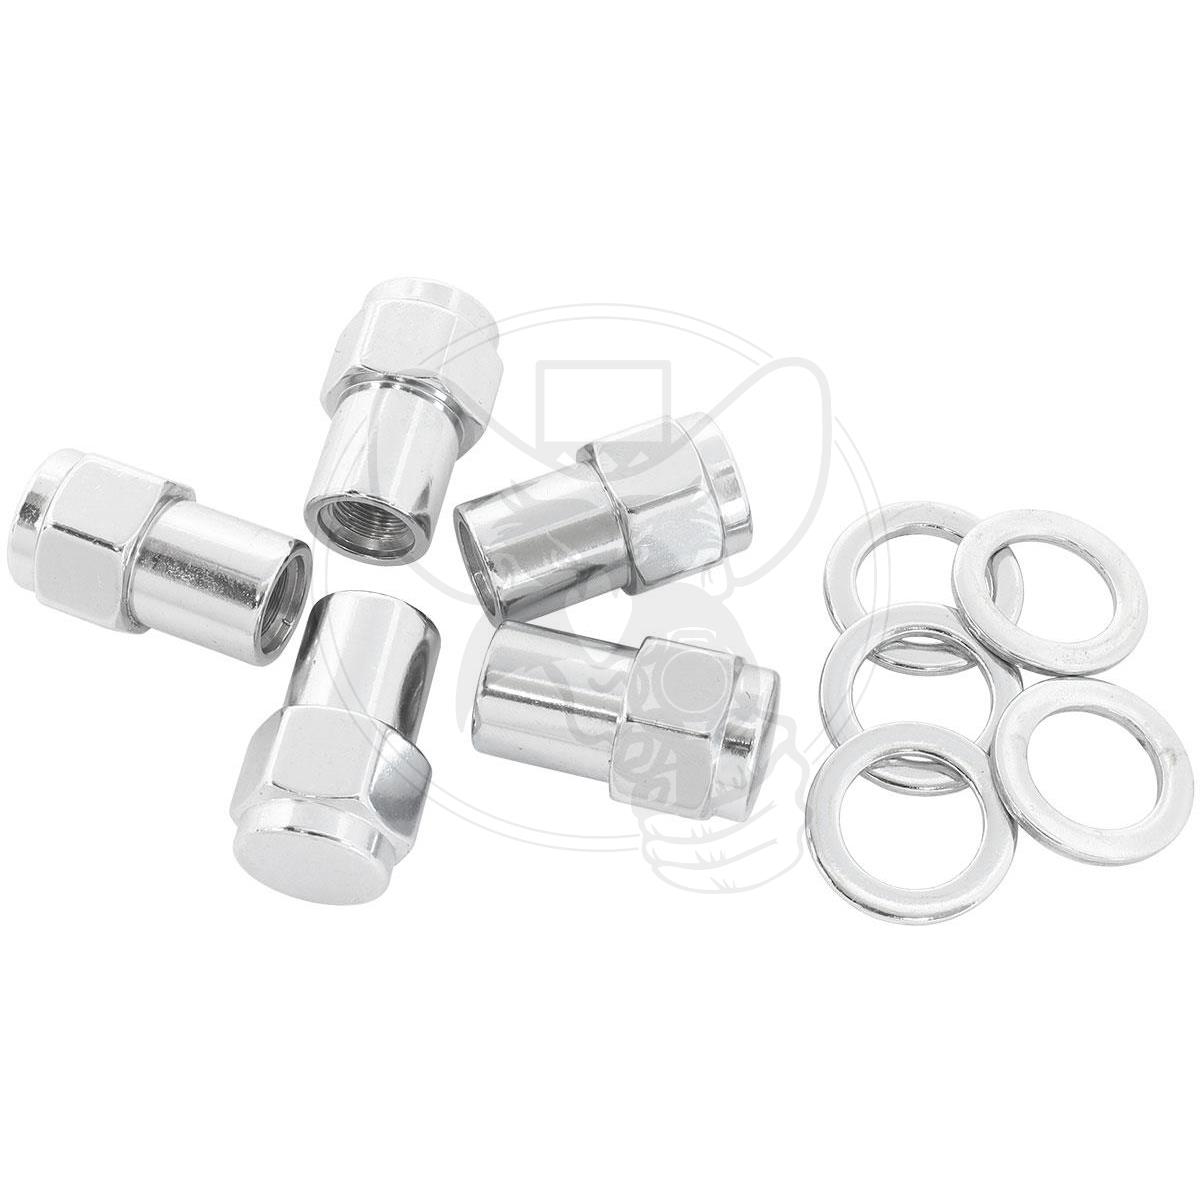 AEROFLOW M12 WHEEL NUTS CHROME 0.550"SHANK CLOSED 5-PACK W/WASHERS